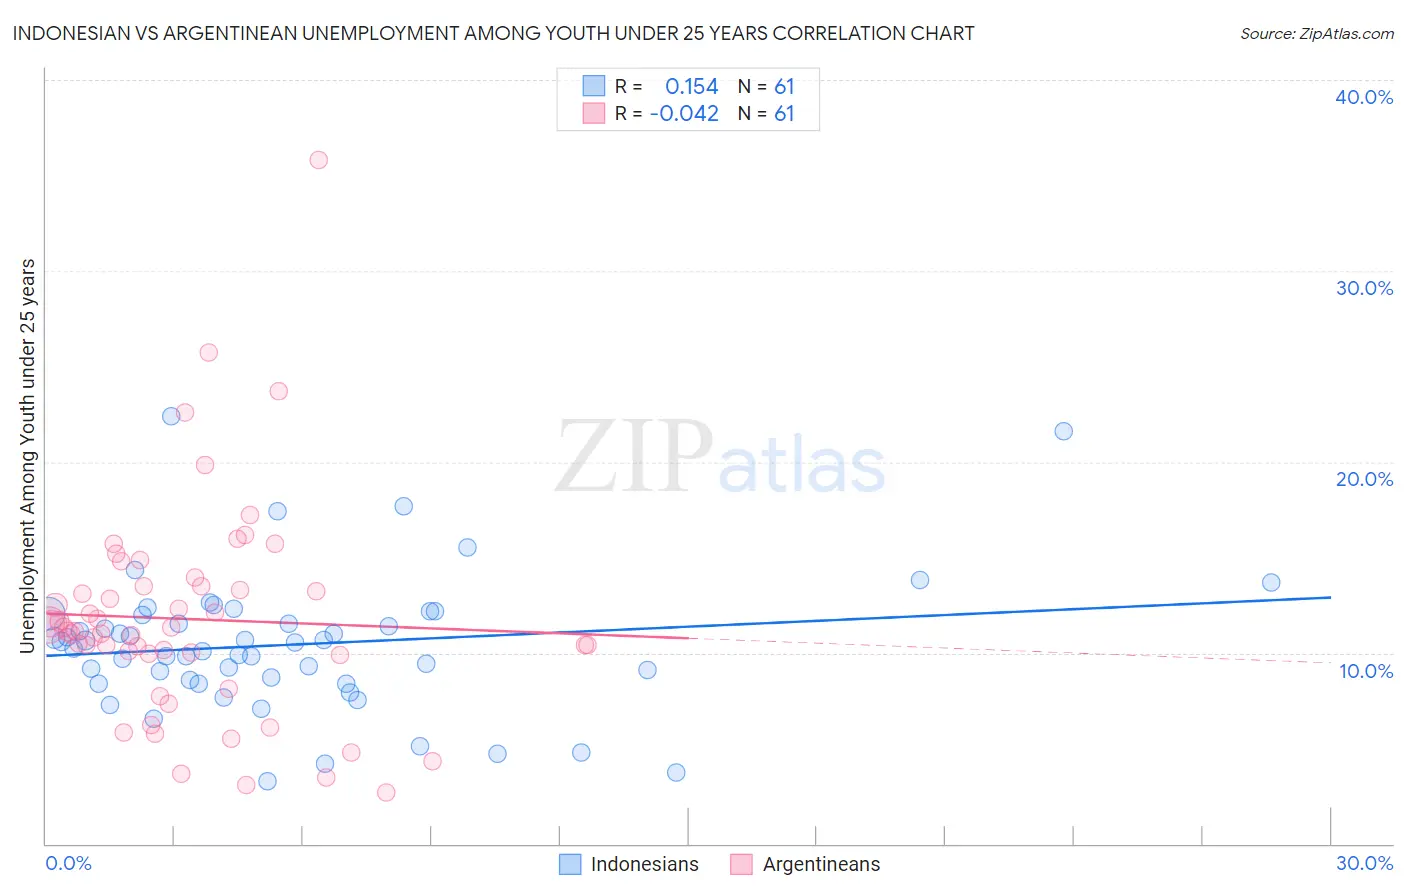 Indonesian vs Argentinean Unemployment Among Youth under 25 years